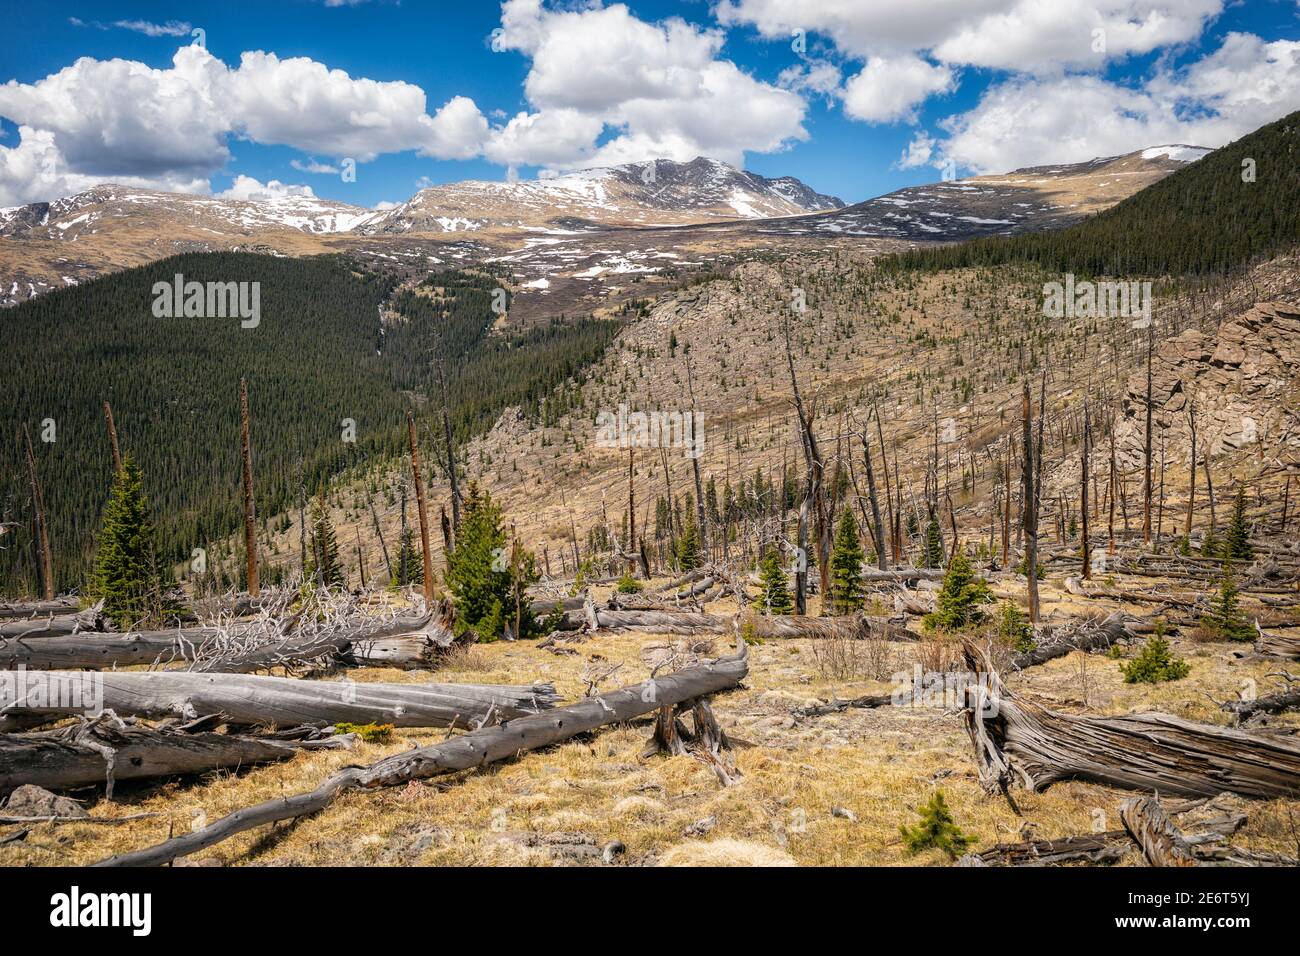 Landscape in the Mount Evans Wilderness, Colorado Stock Photo